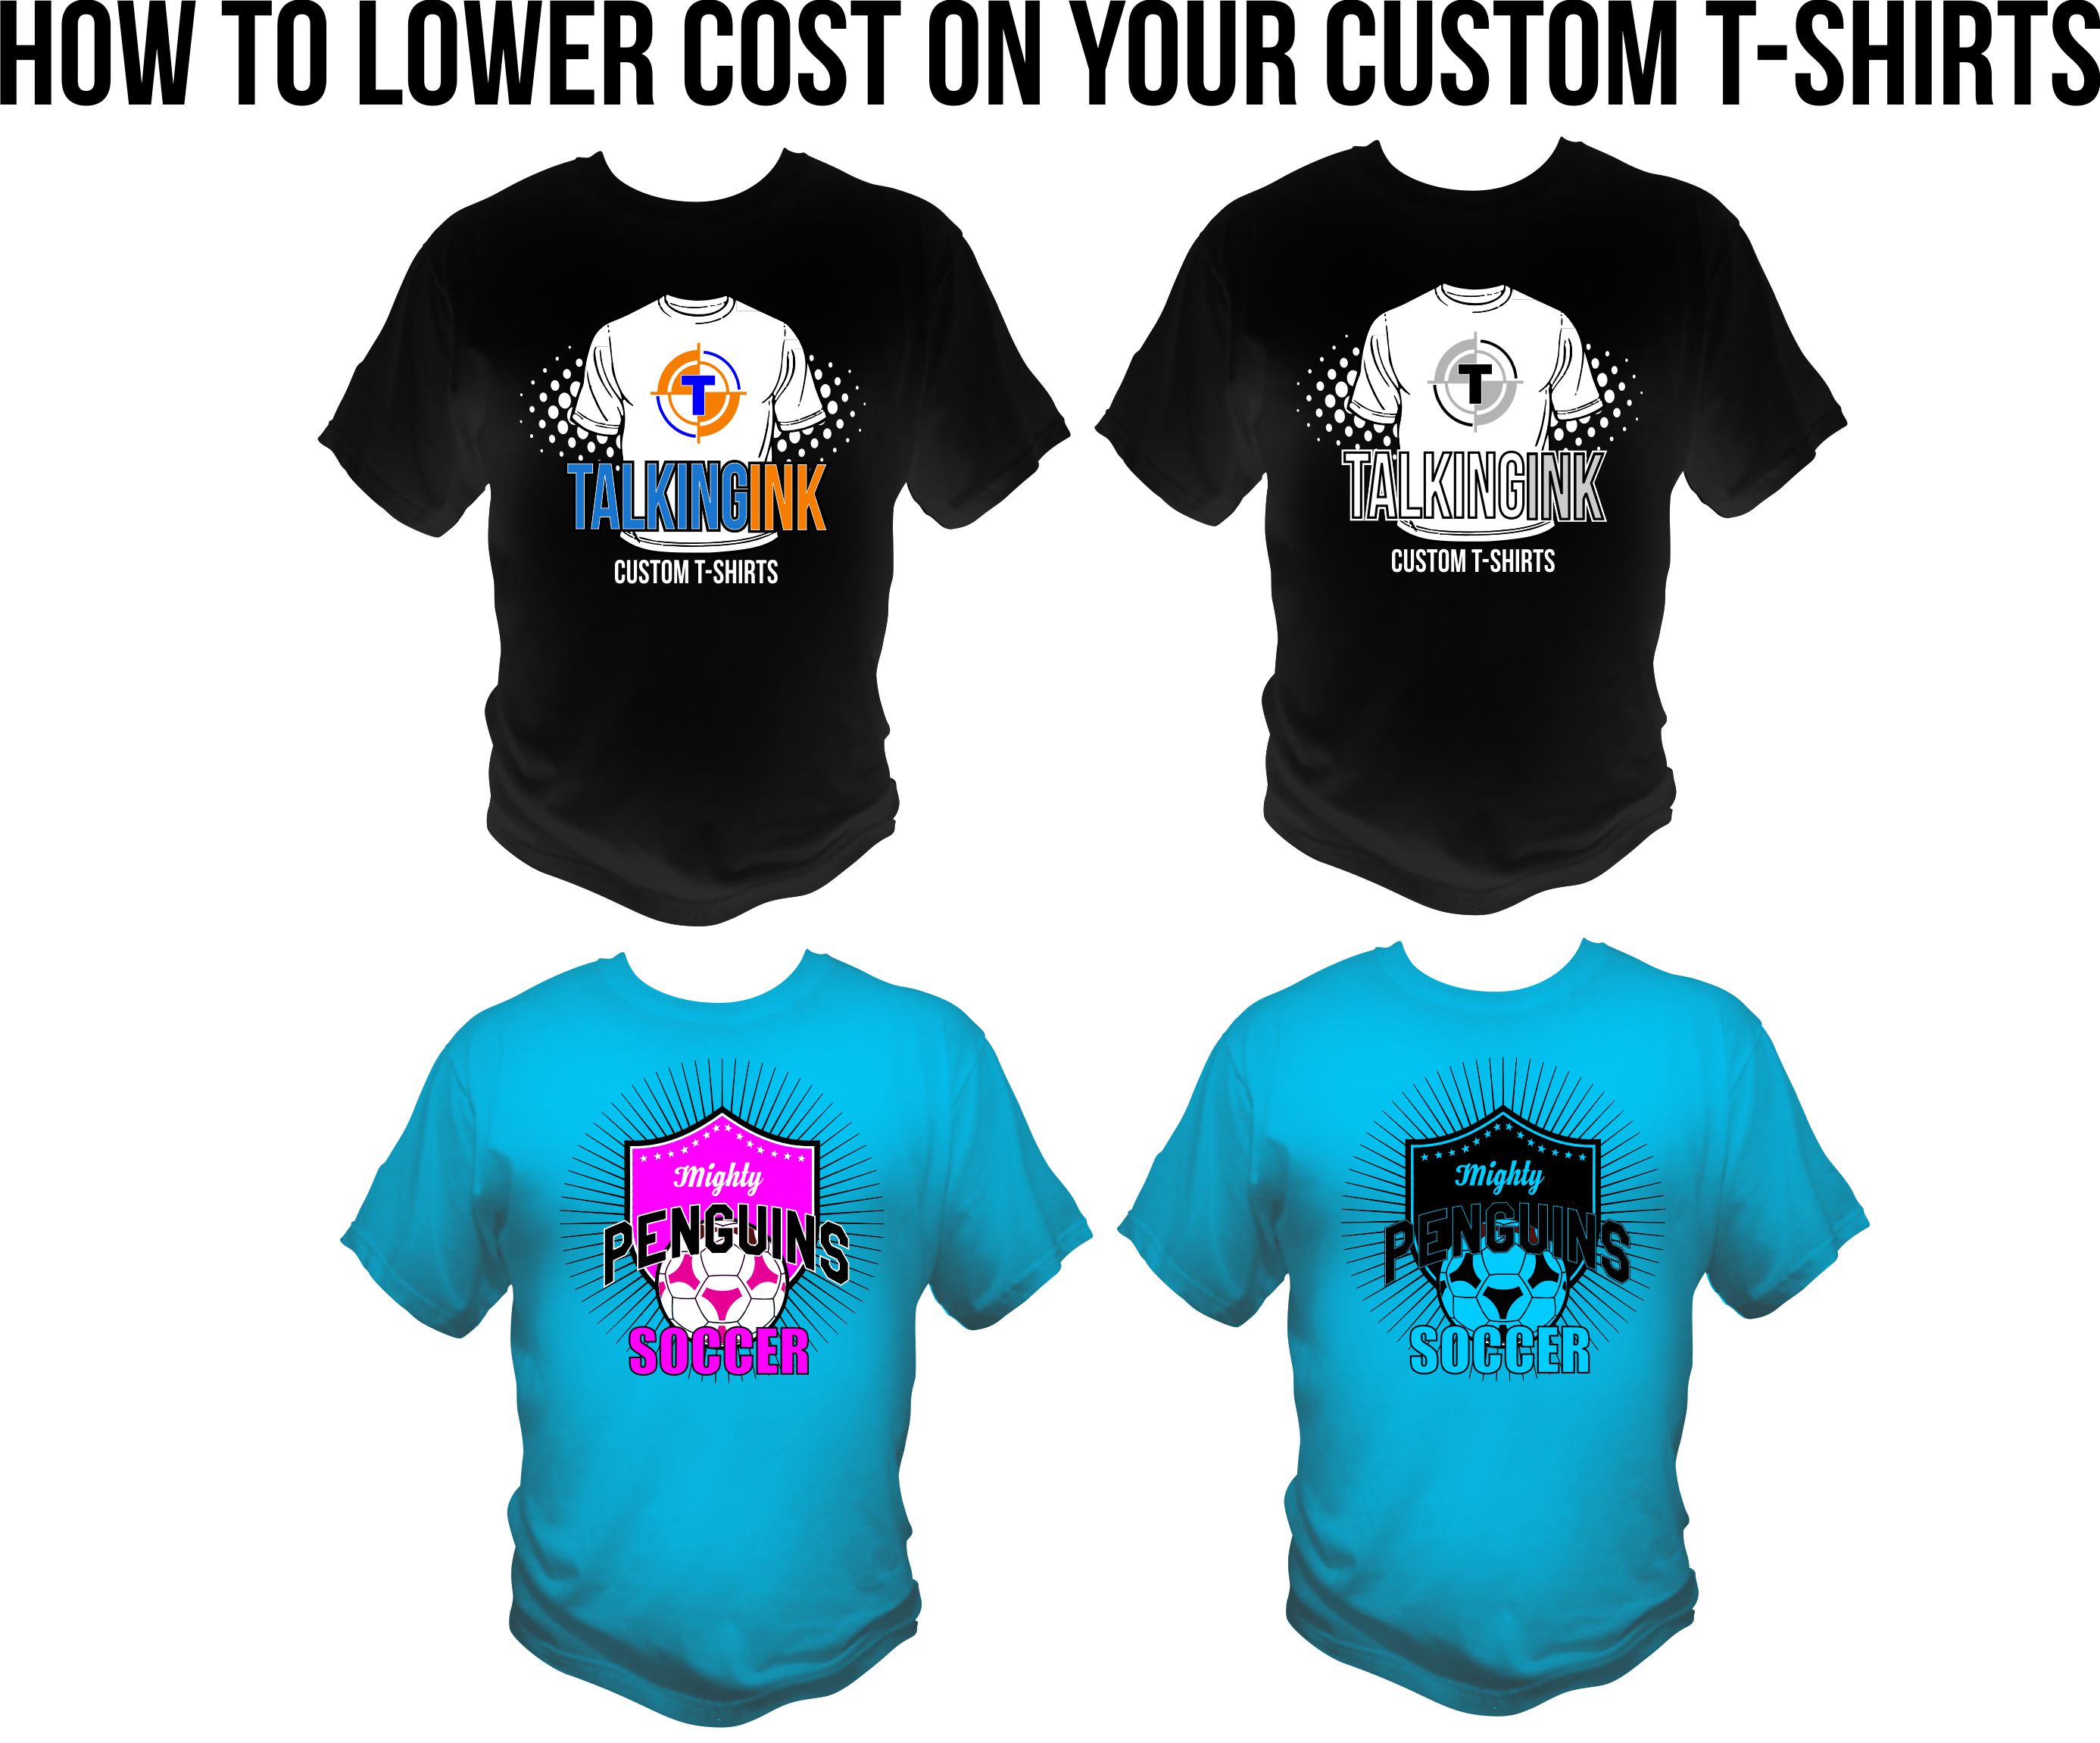 how to lower cost on your custom t-shirts